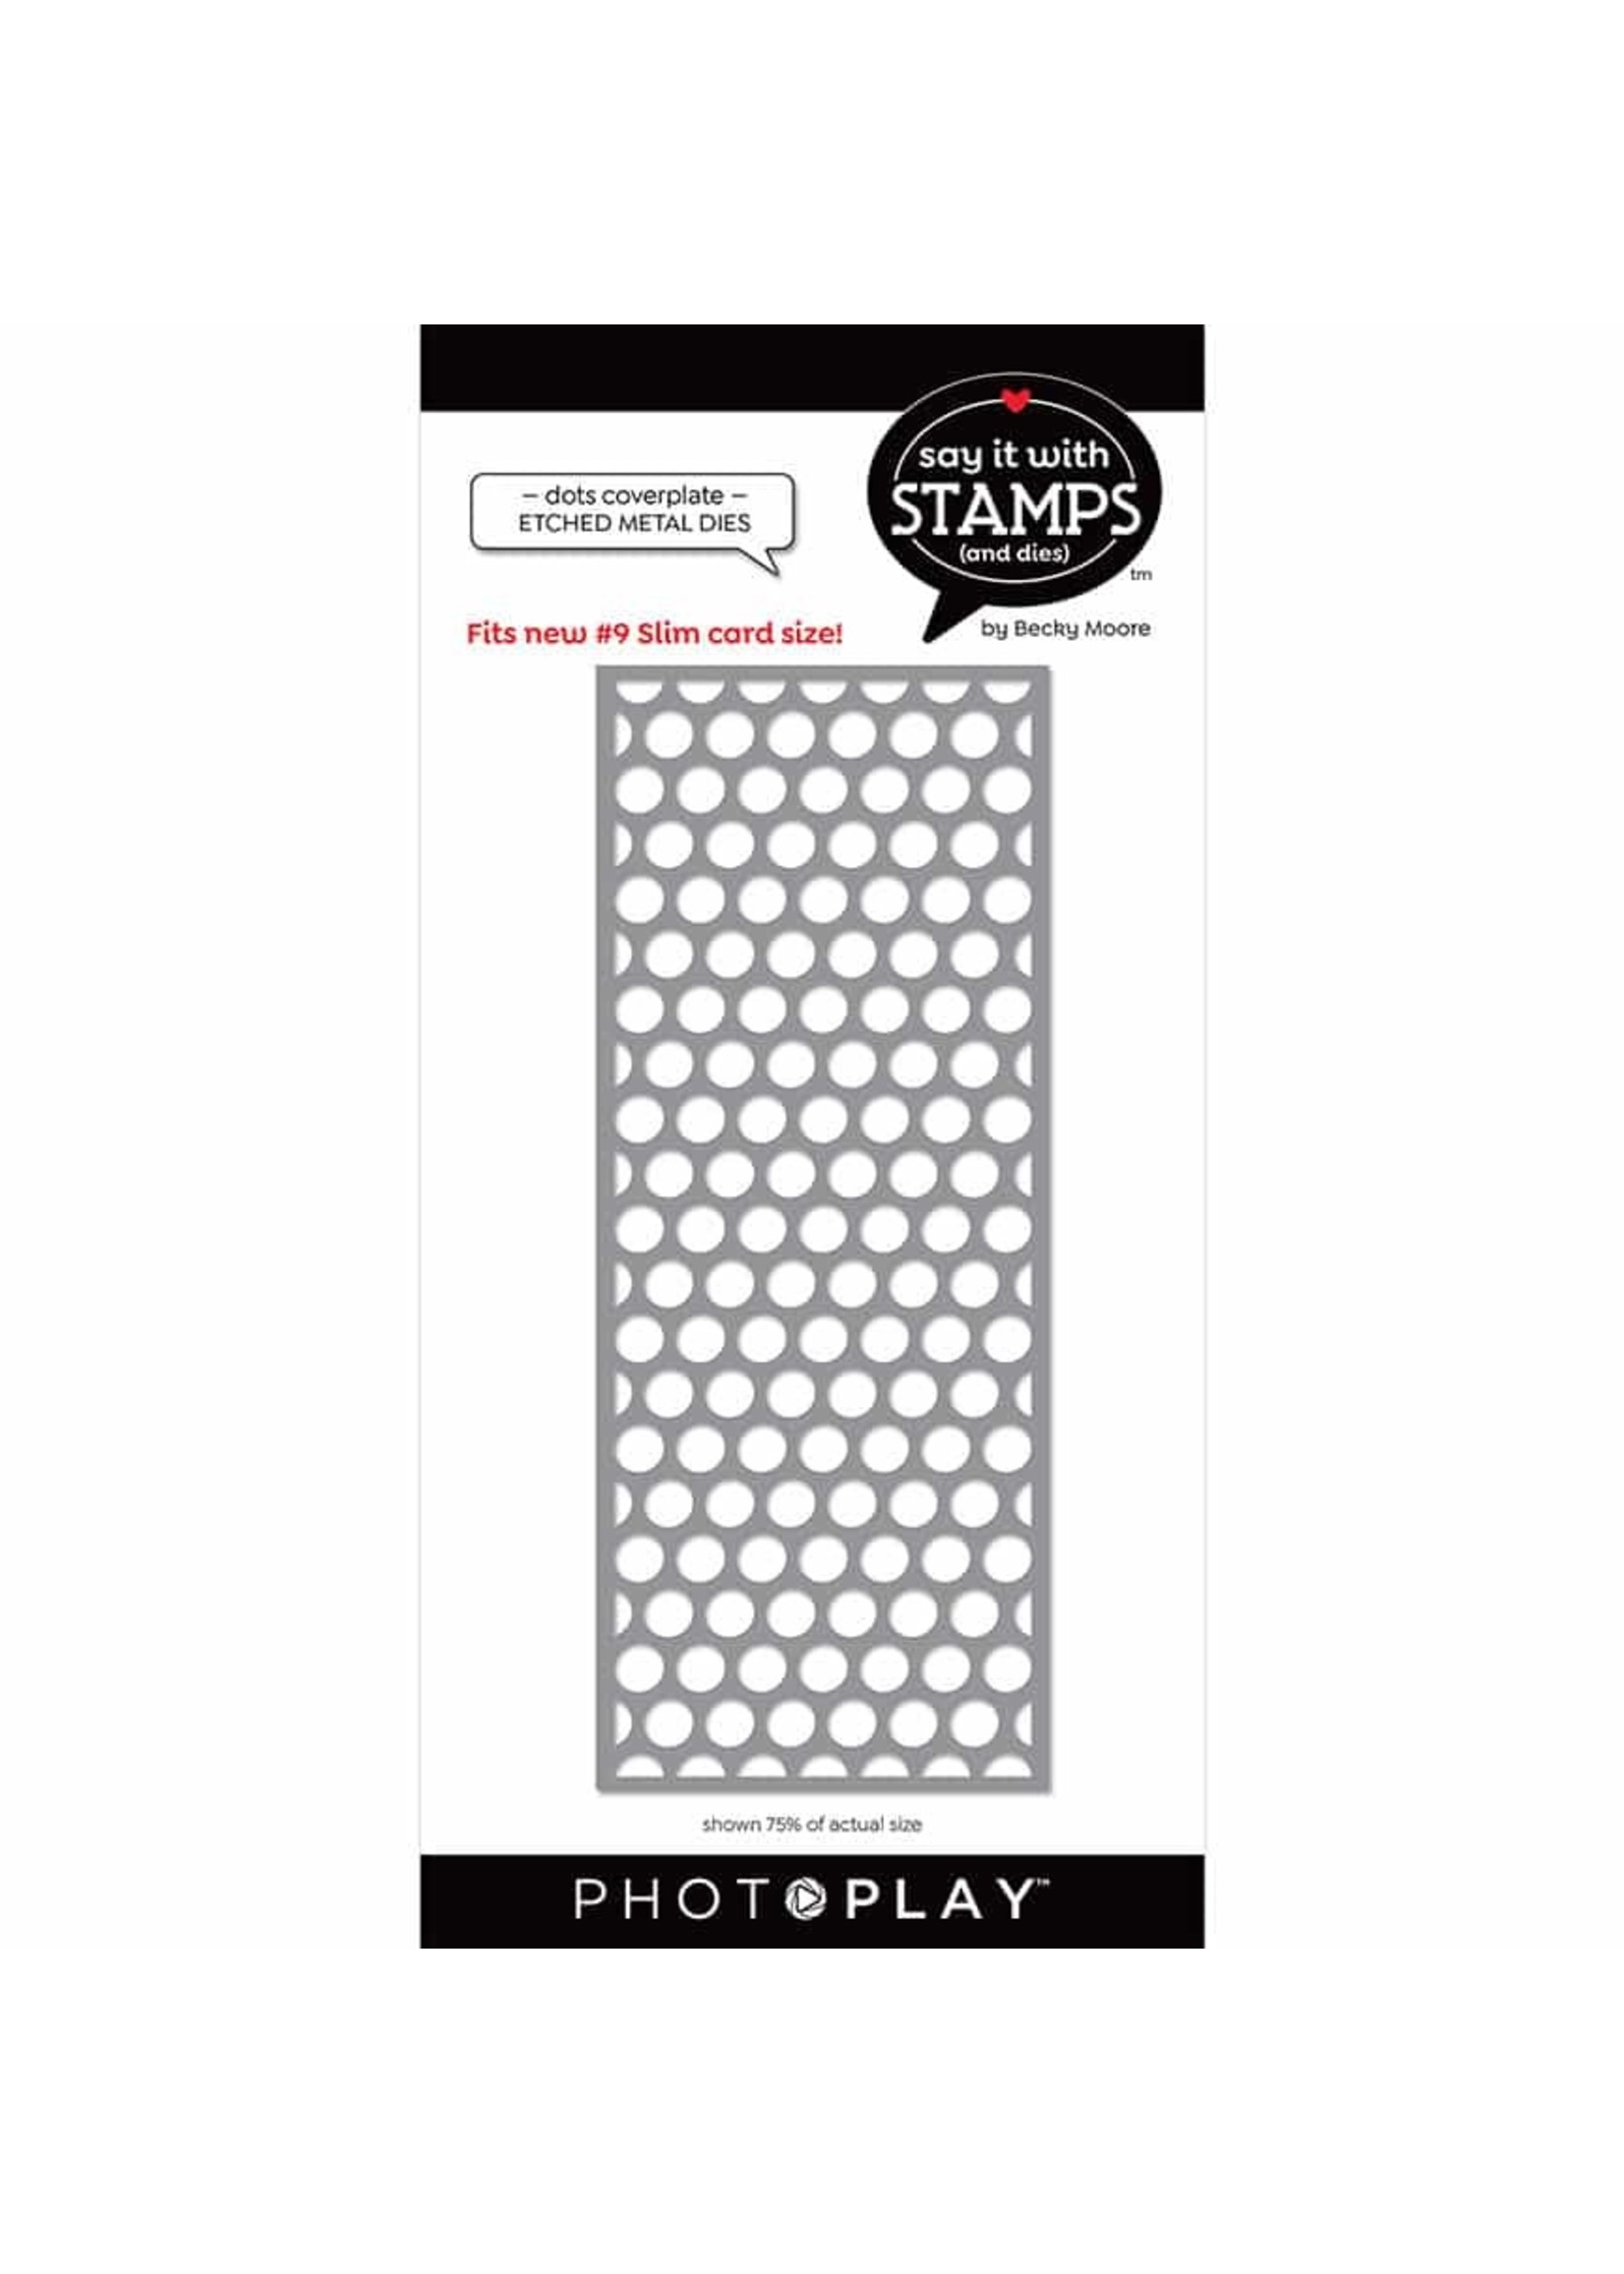 Photoplay #9 Dots Coverplate Dies